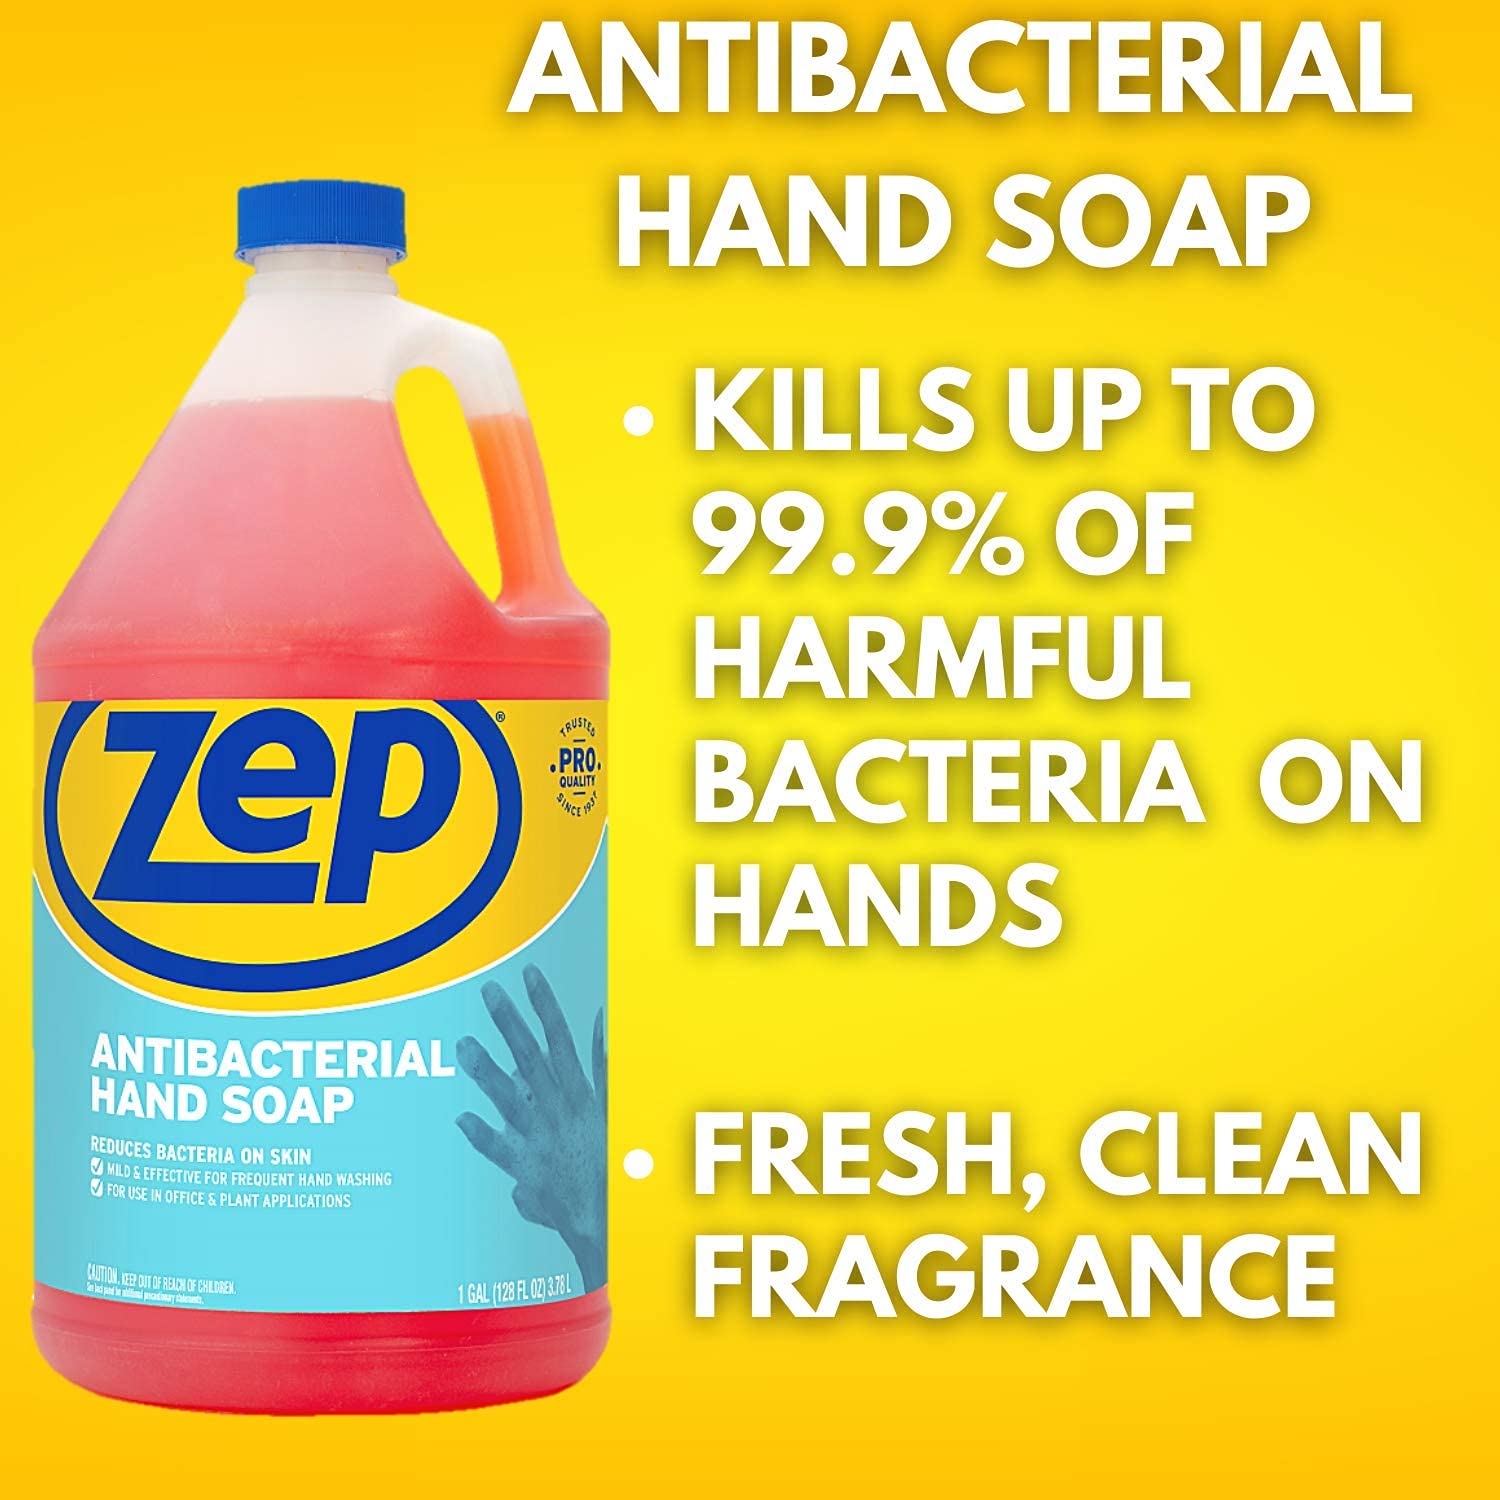 Zep - 314924 - Anti-Bacterial Hand Soap, 1 Gallon, Gold-Colored